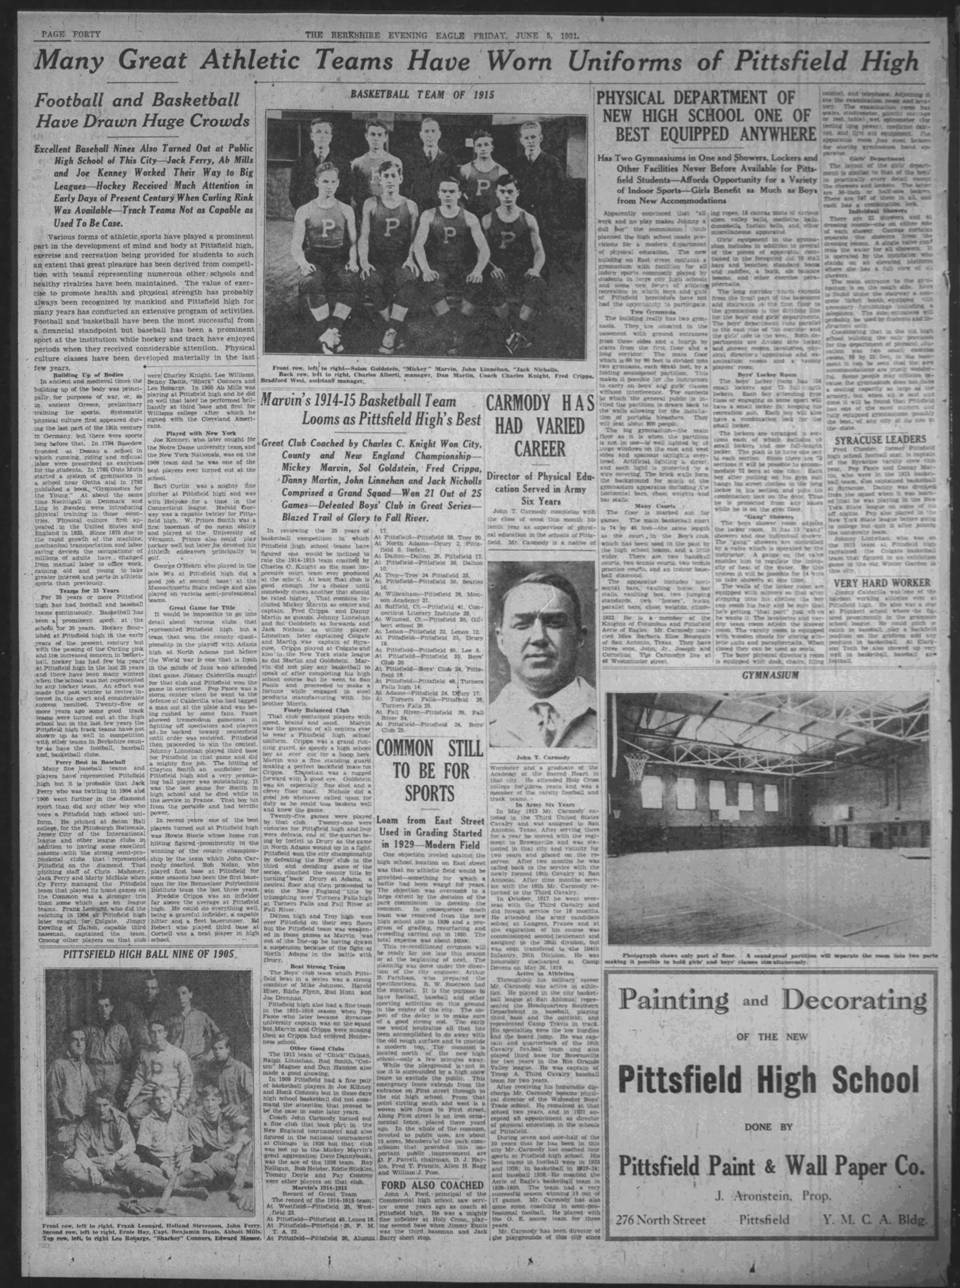 The_Berkshire_Eagle_1931_06_05_page_40.jpg